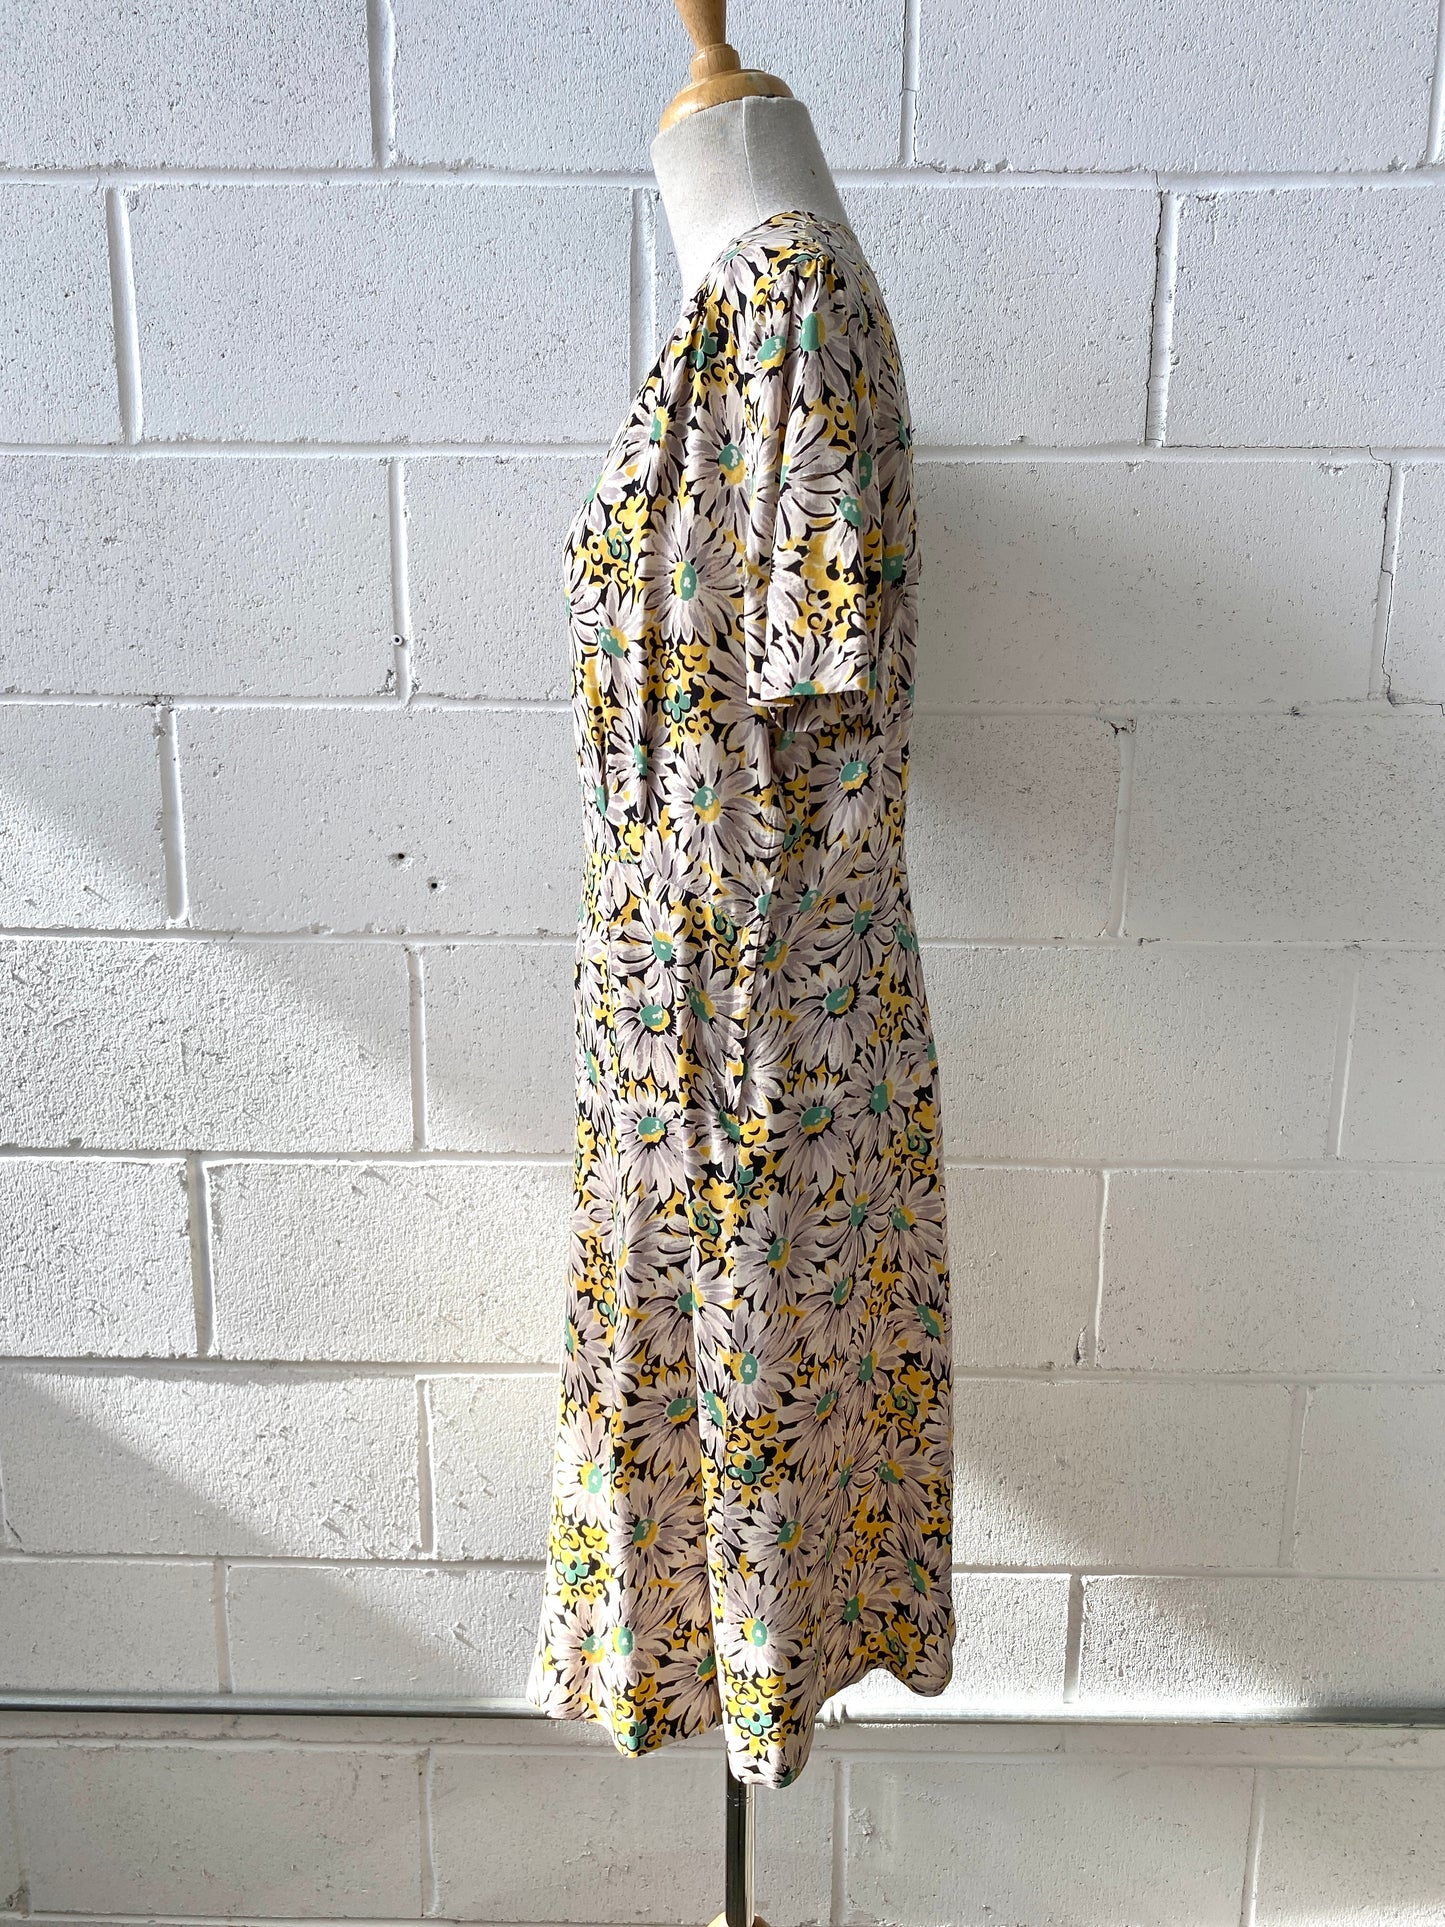 Vintage 1940s Yellow Floral Print Rayon Day Dress, Large 